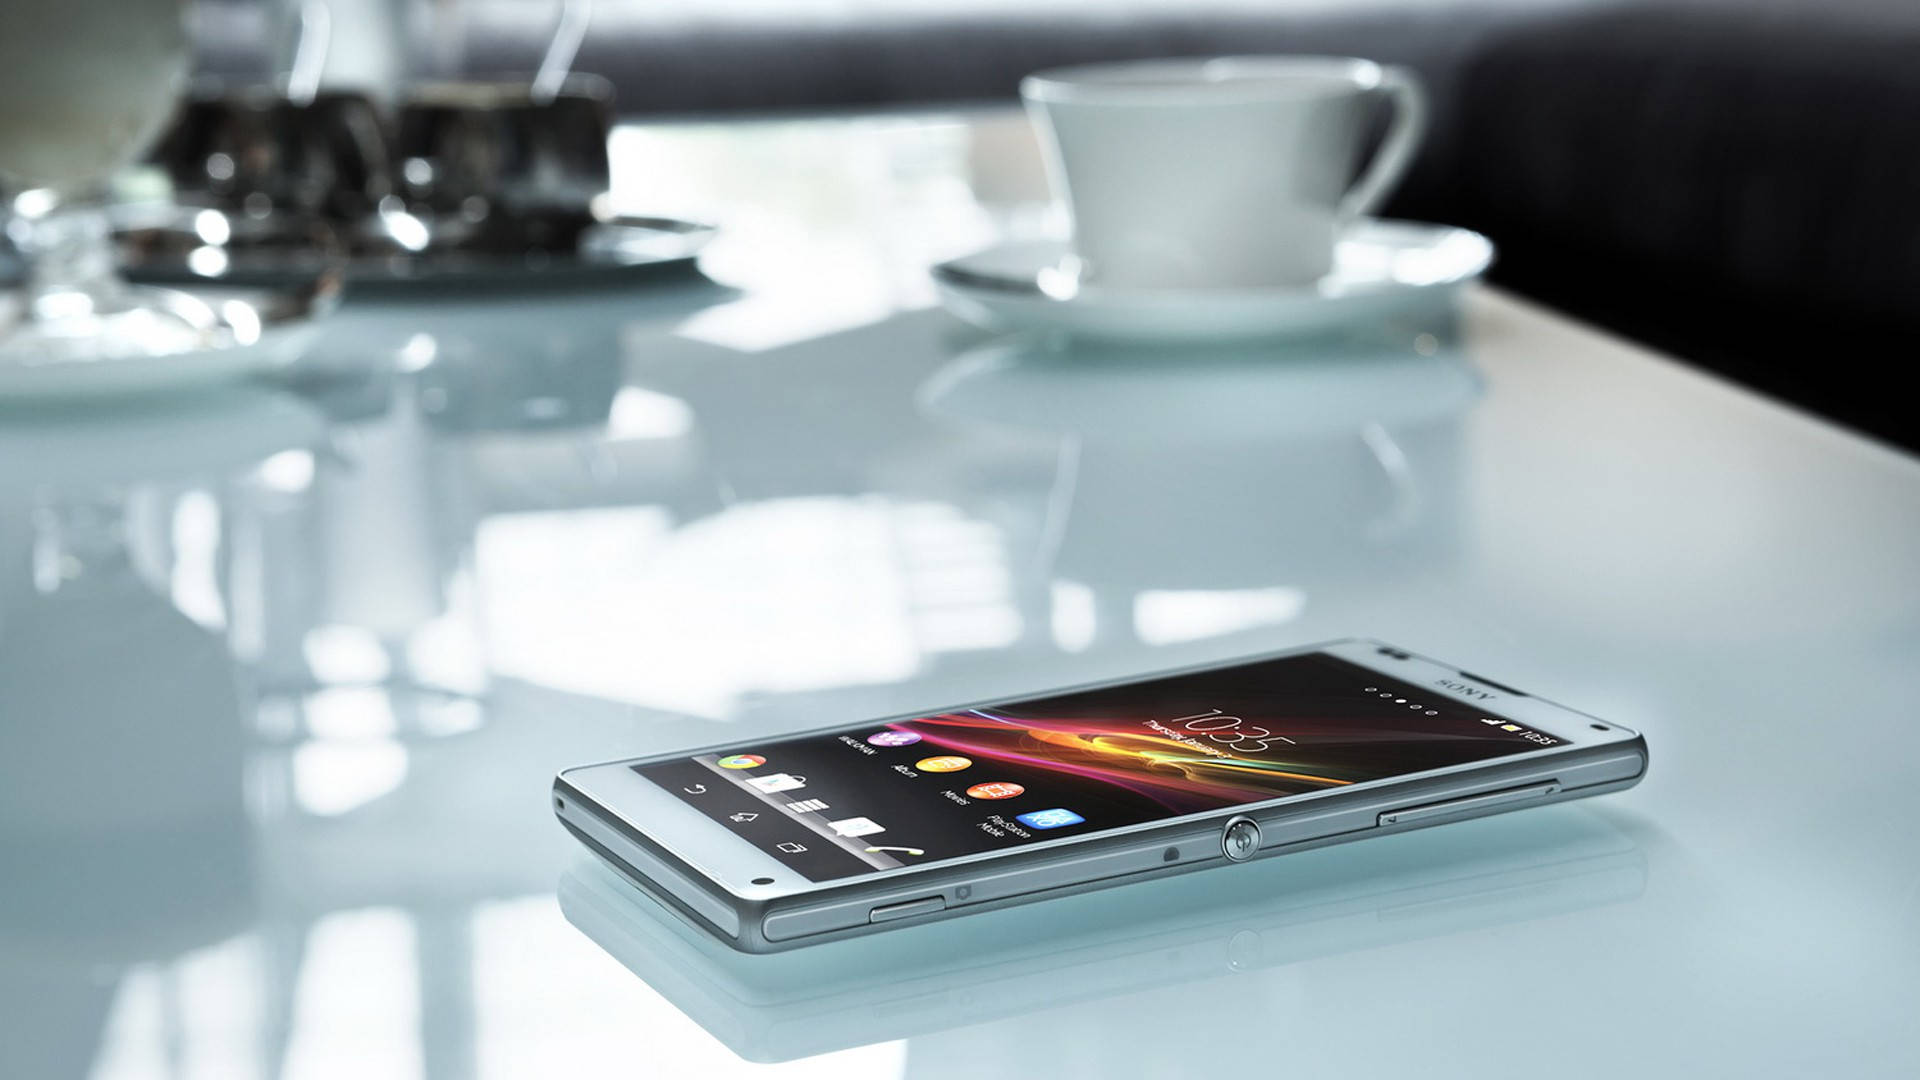 Sony Xperia On Table Background